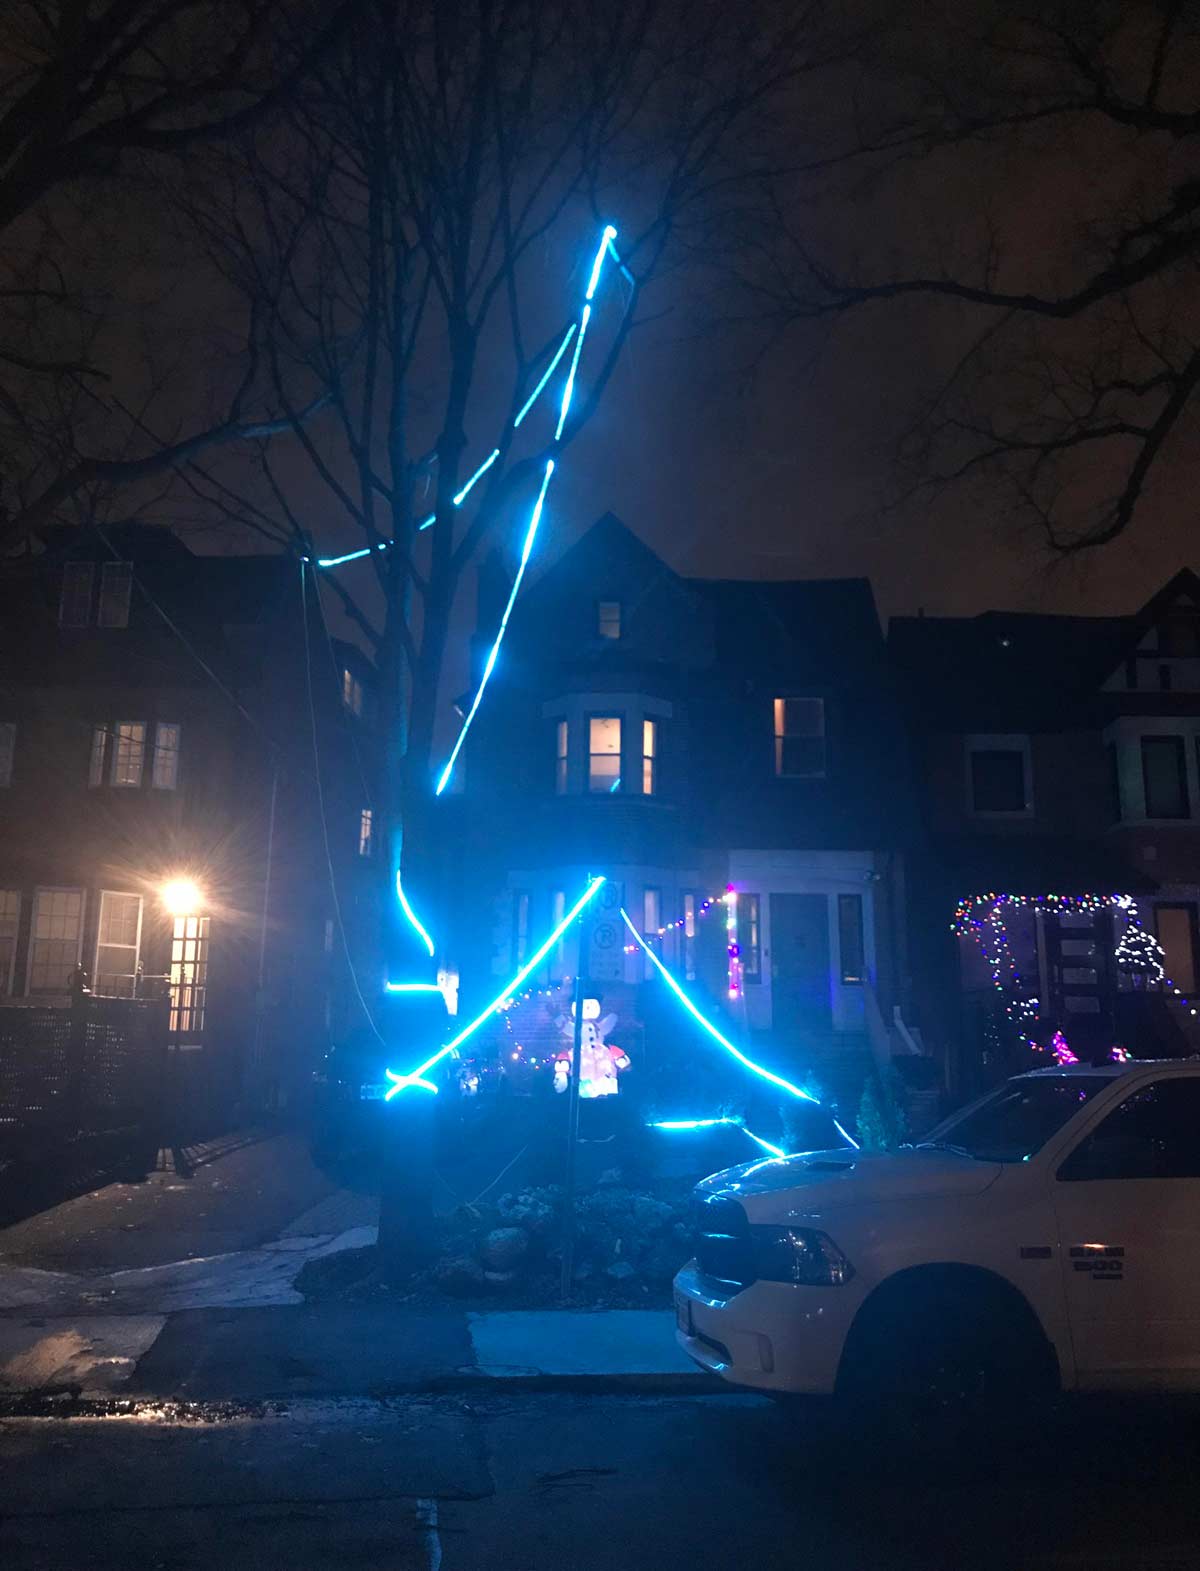 These Christmas lights down the street